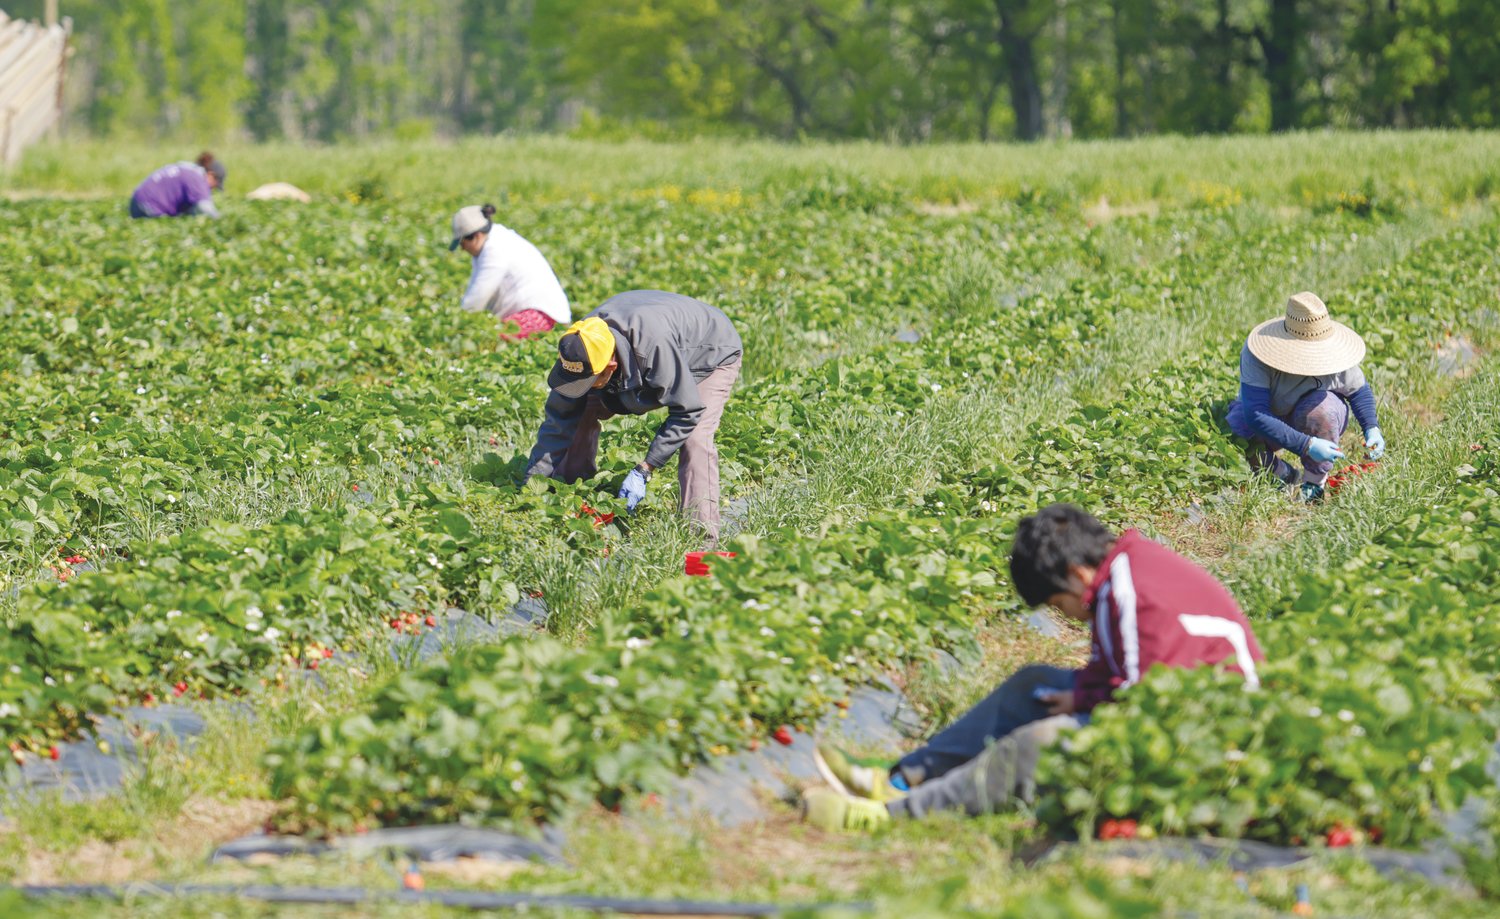 Customers at Kildee Farm pick strawberries at the start of strawberry season there Saturday. It's located in Ramseur.